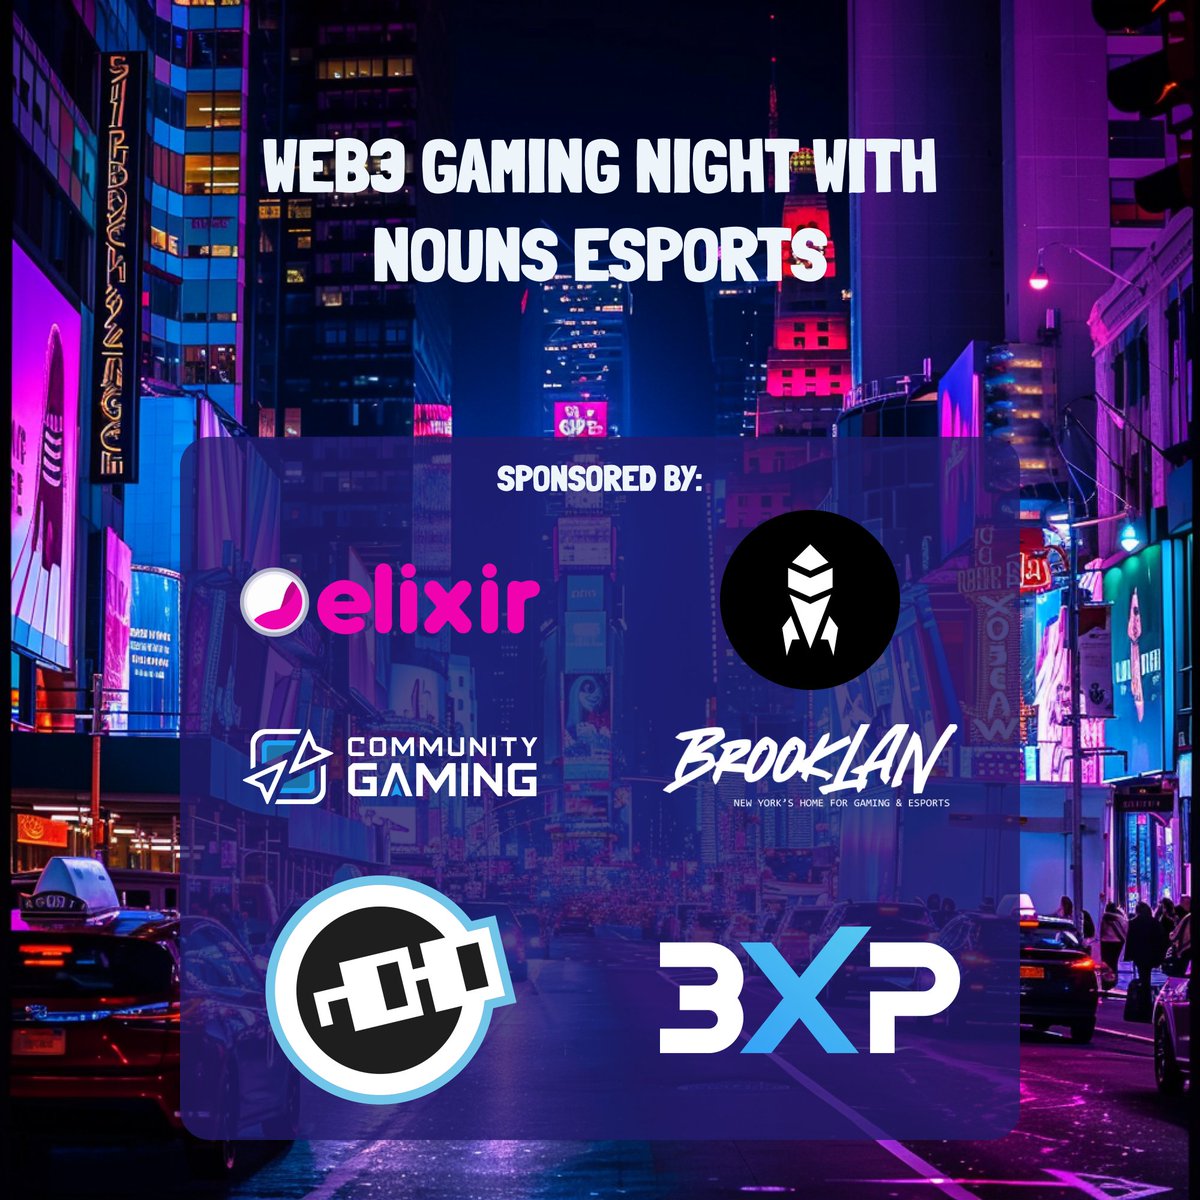 Join Nouns Esports, Community Gaming & 3XP at BrookLAN on April 5th! Challenge our pros Aklo & Smug in Melee and Street Fighter for a chance to win USDC & exclusive NFTs! 🏆 🕒 Event Time: 6-11 PM 🎉 Don't miss out — RSVP now! Limited spots available